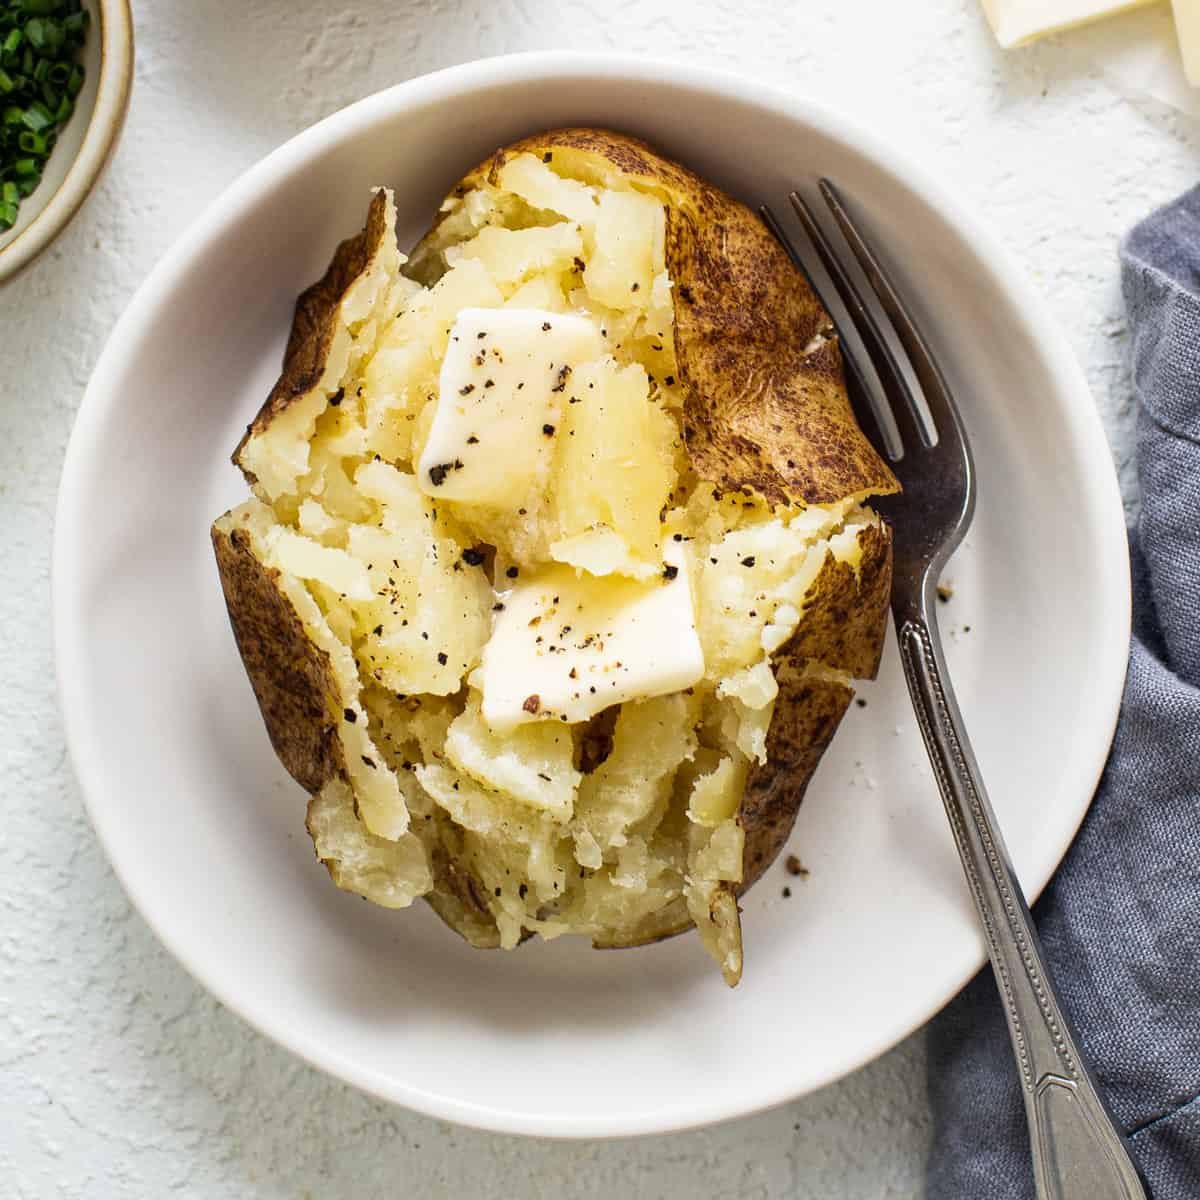 https://fitfoodiefinds.com/wp-content/uploads/2023/03/Instant-Pot-Baked-Potatoes-sq.jpg